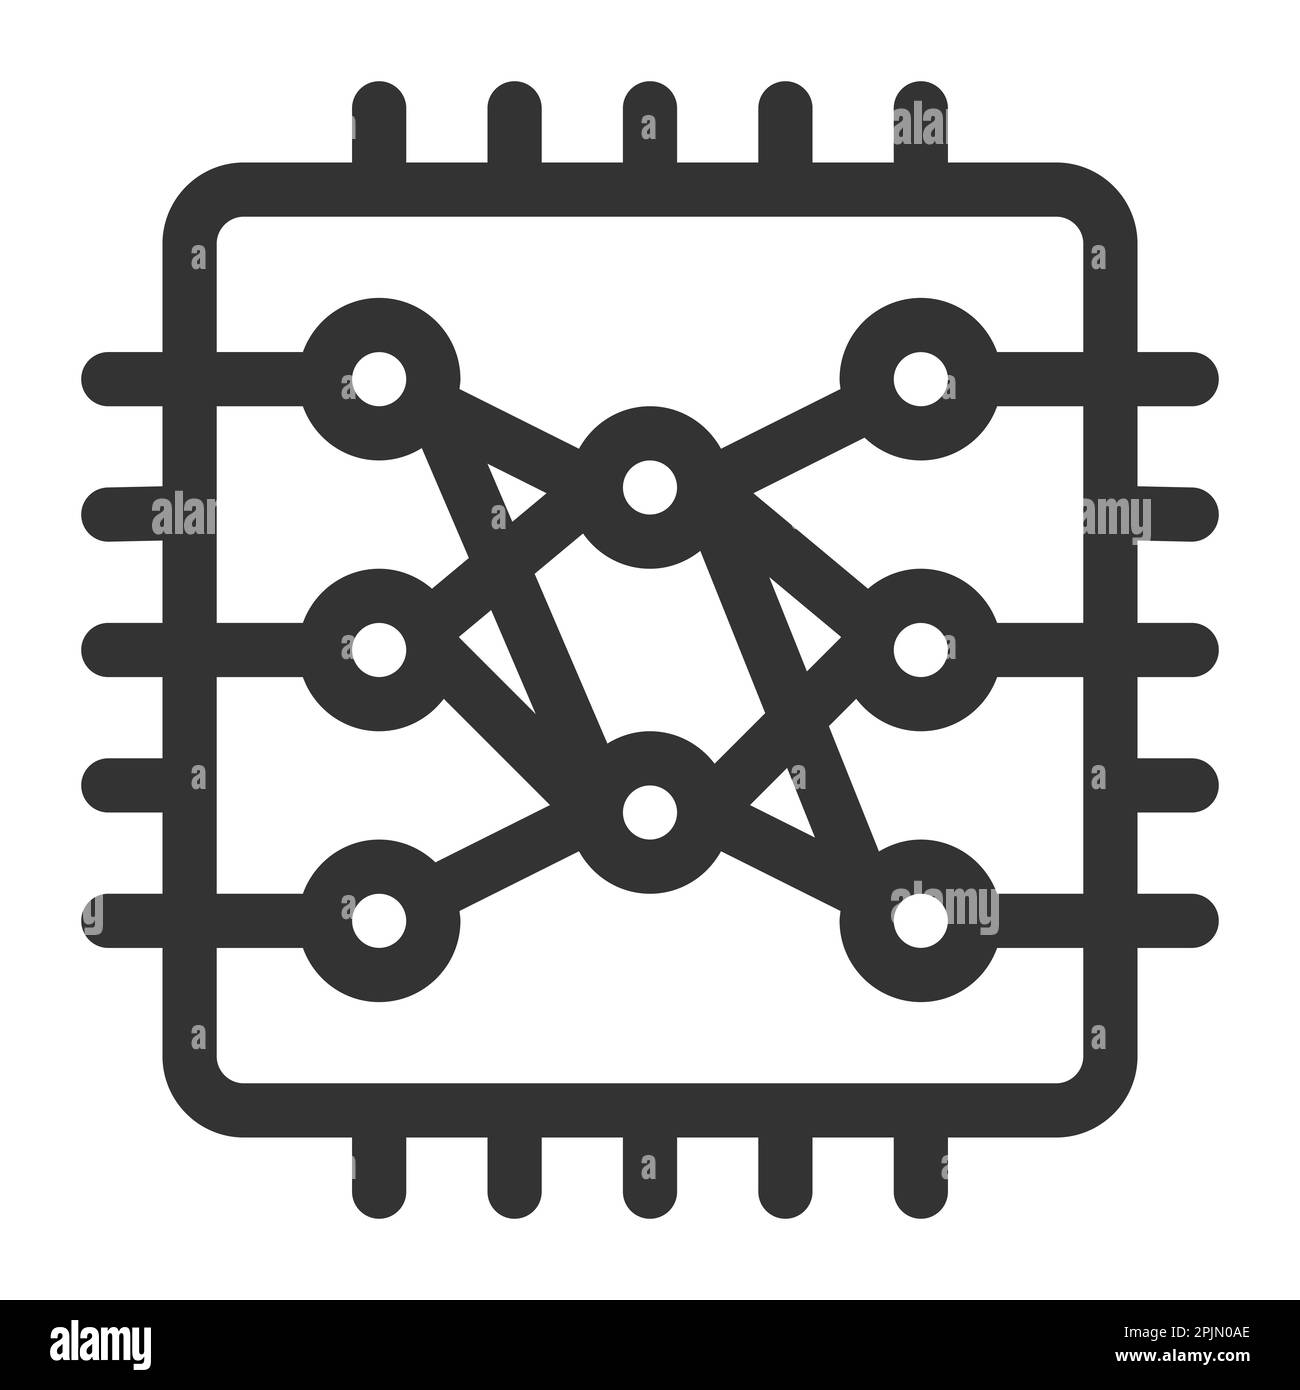 Chip with neural network inside. Artificial intelligence, deep learning concept. Vector illustration Stock Vector